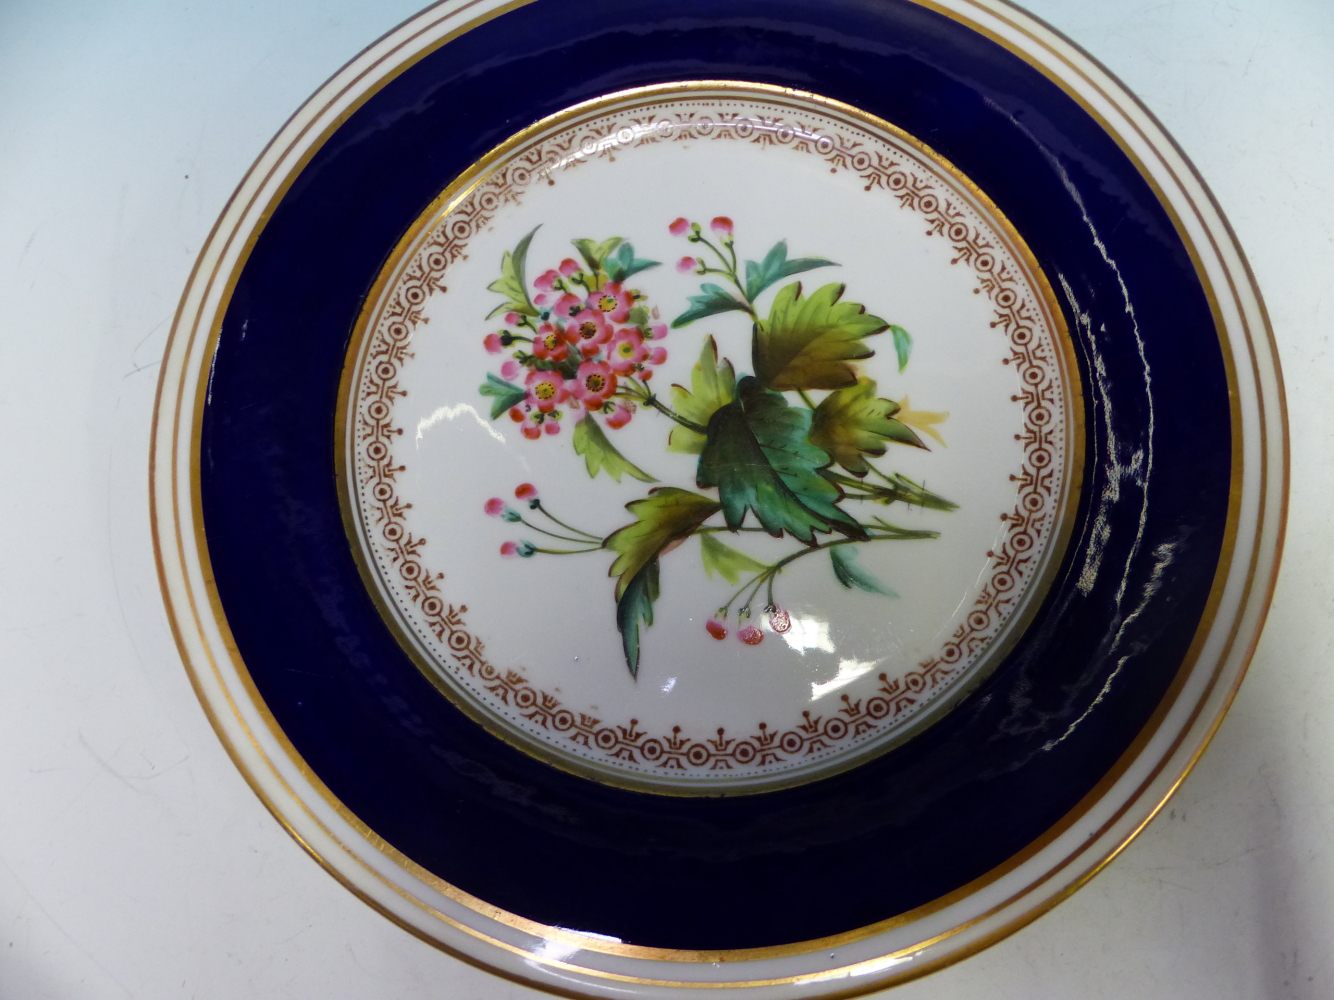 A LATE 19th C. ENGLISH PORCELAIN DESSERT SERVICE, EACH PIECE PRINTED AND PAINTED WITH FLOWERS WITHIN - Image 17 of 18